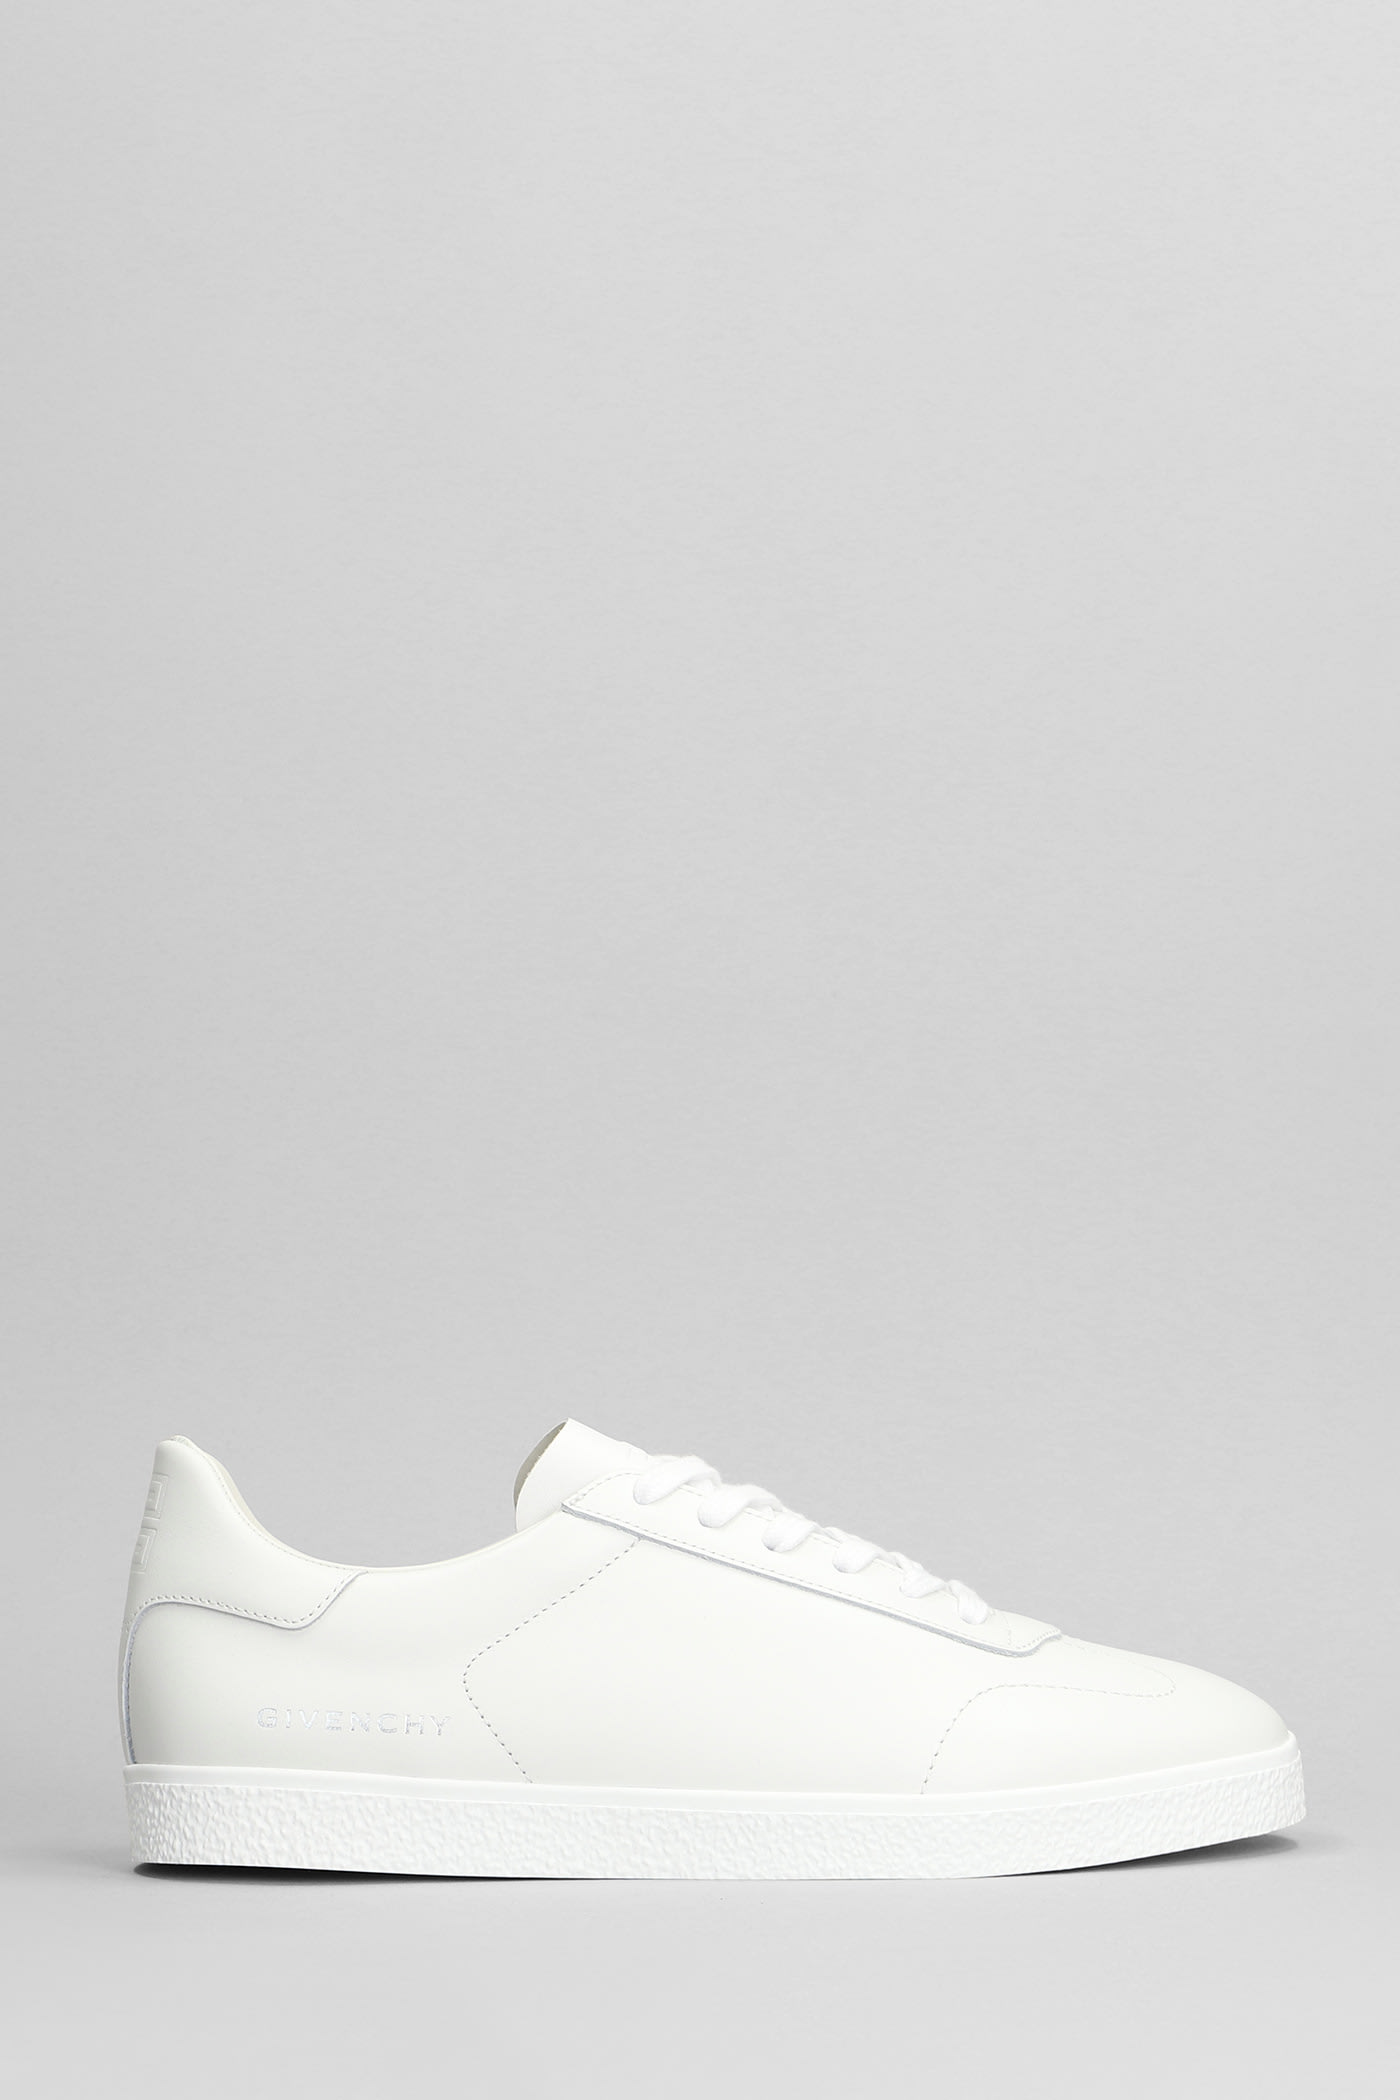 Givenchy Town Trainers In White Leather